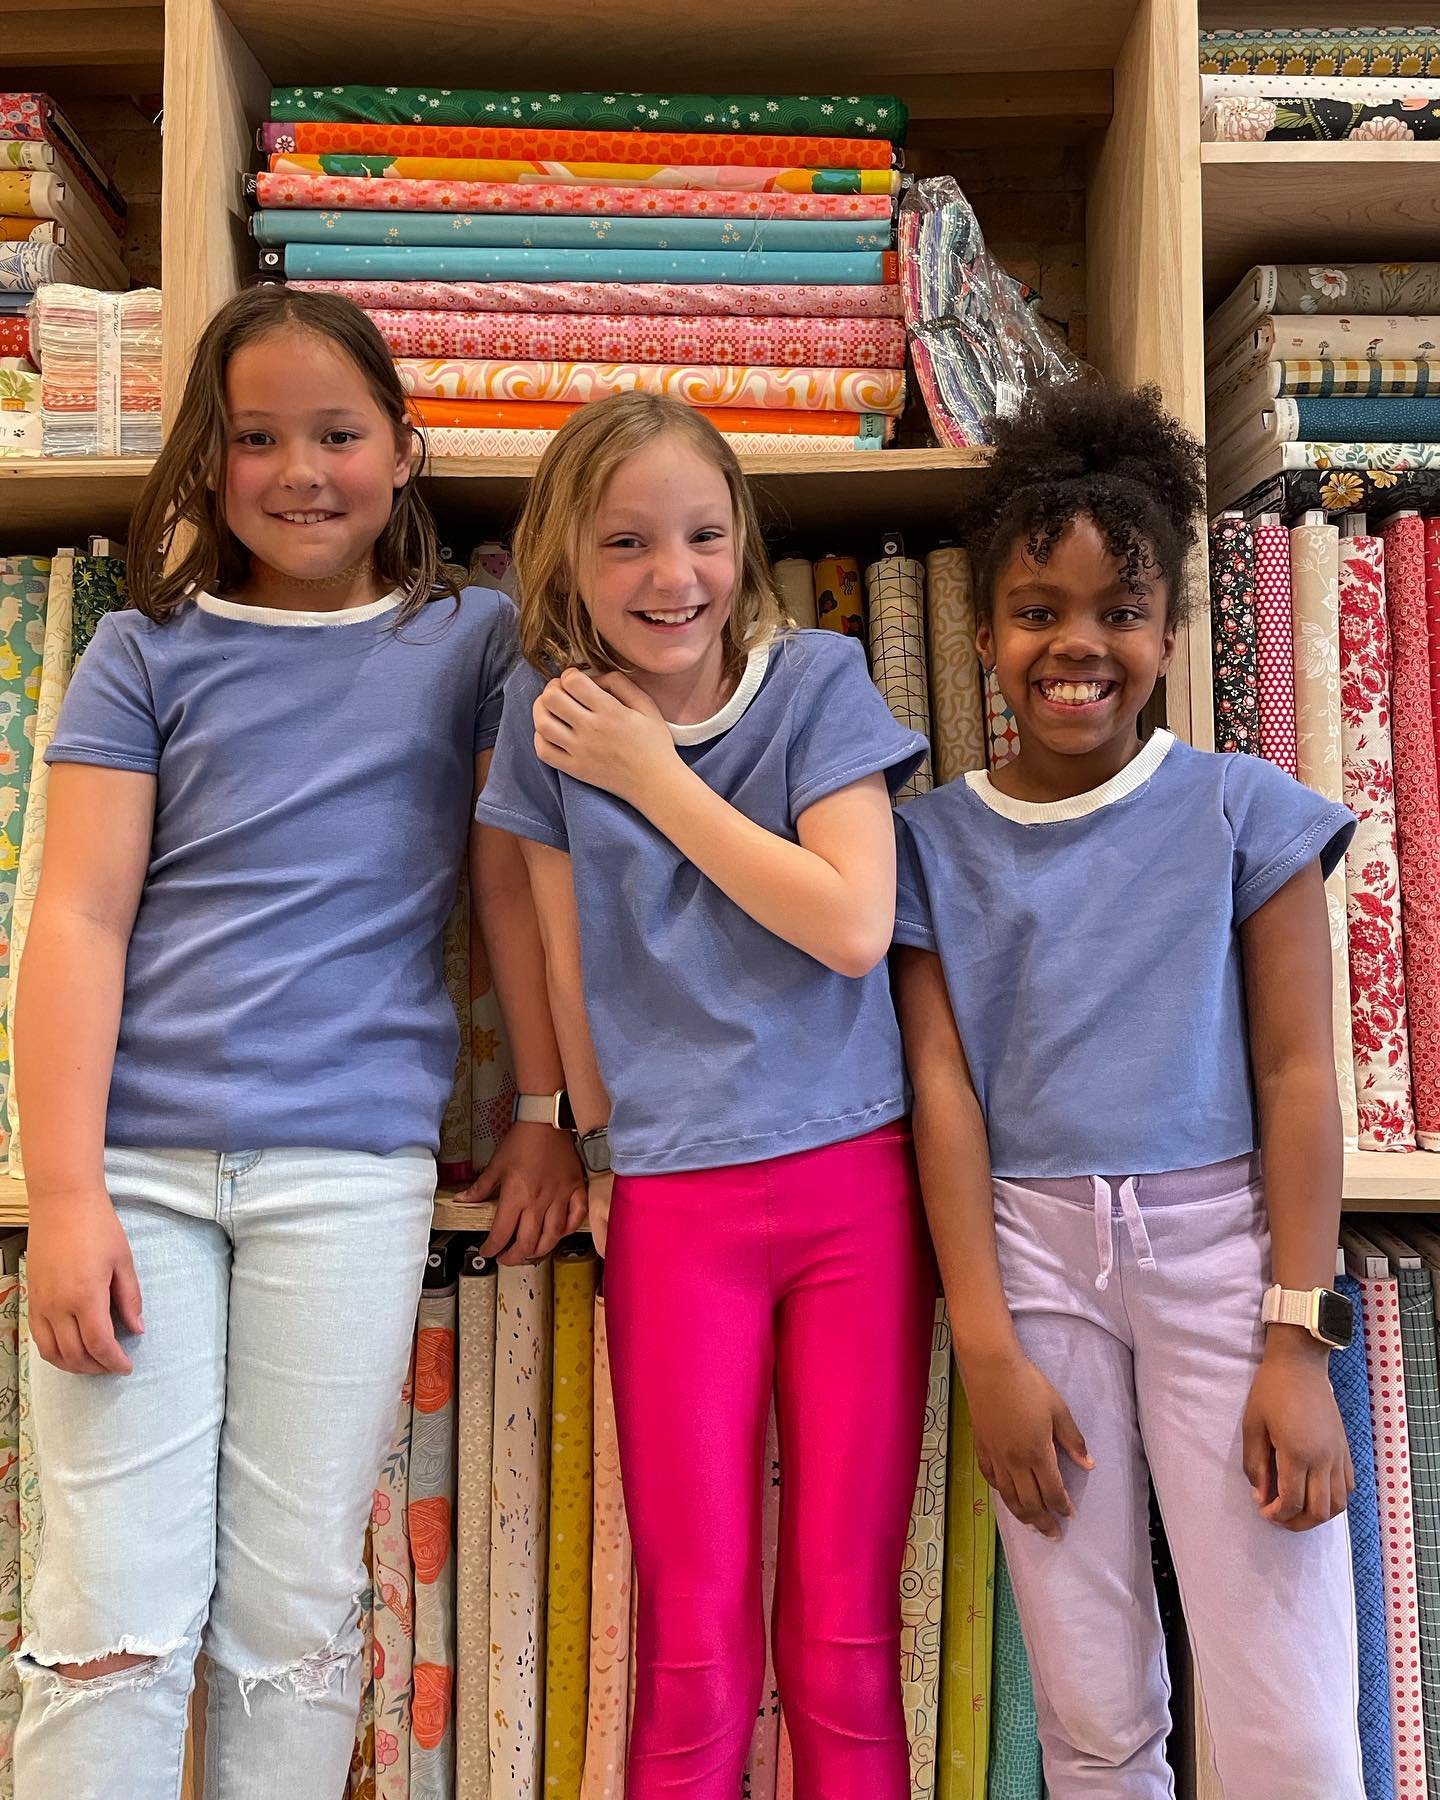 🪡👏Our Advanced Beginner classes are finishing up their mini Rio t-shirts by @truebias &mdash; They had a wonderful time learning to work with new fabrics and making clothing for themselves!

✂️Some of the shirts were made with @robertkaufman knits,